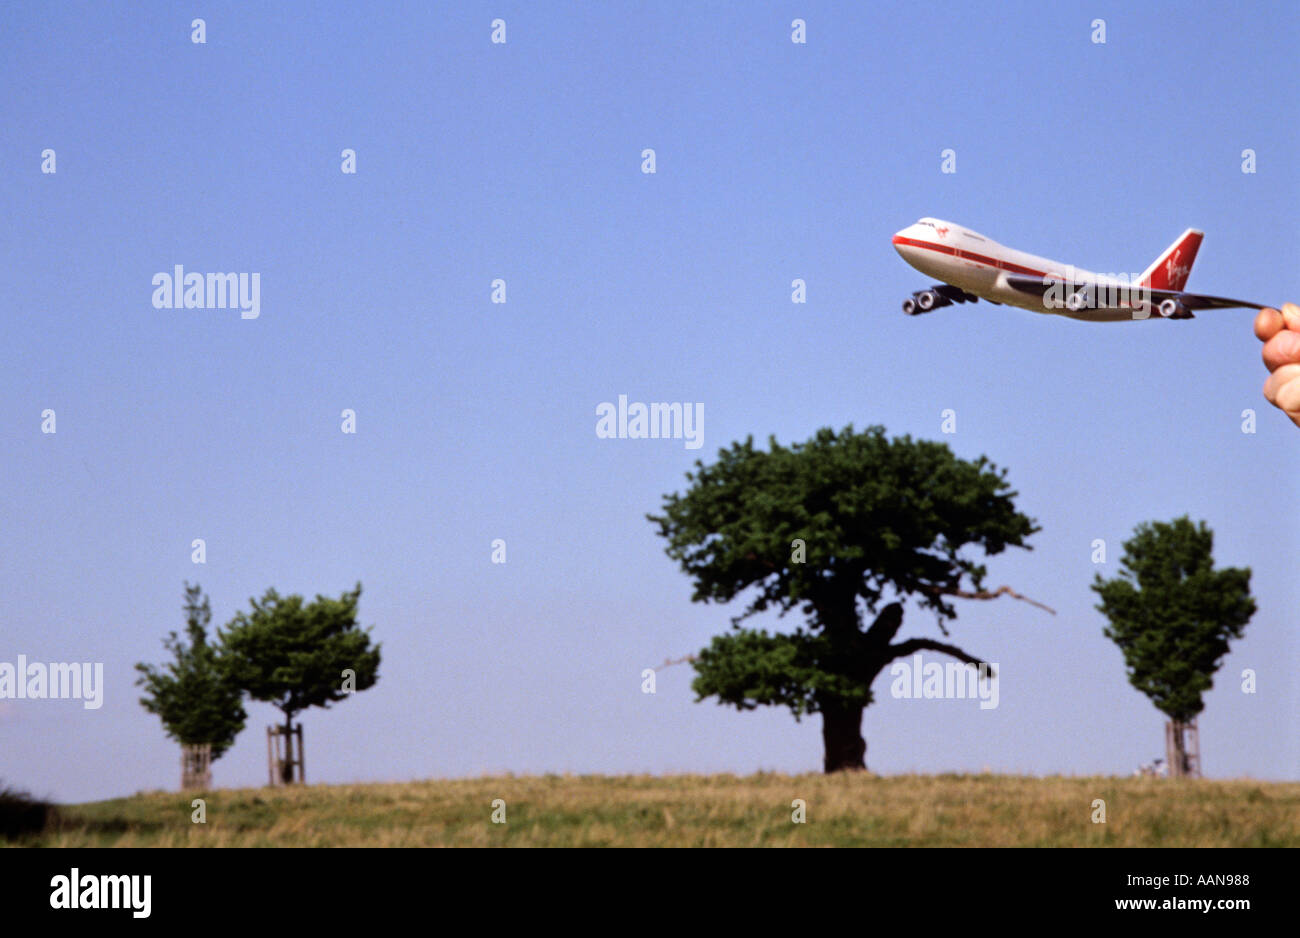 Toy Boeing 747 jumbo jet being held in front of landscape to give appearance of flying Stock Photo